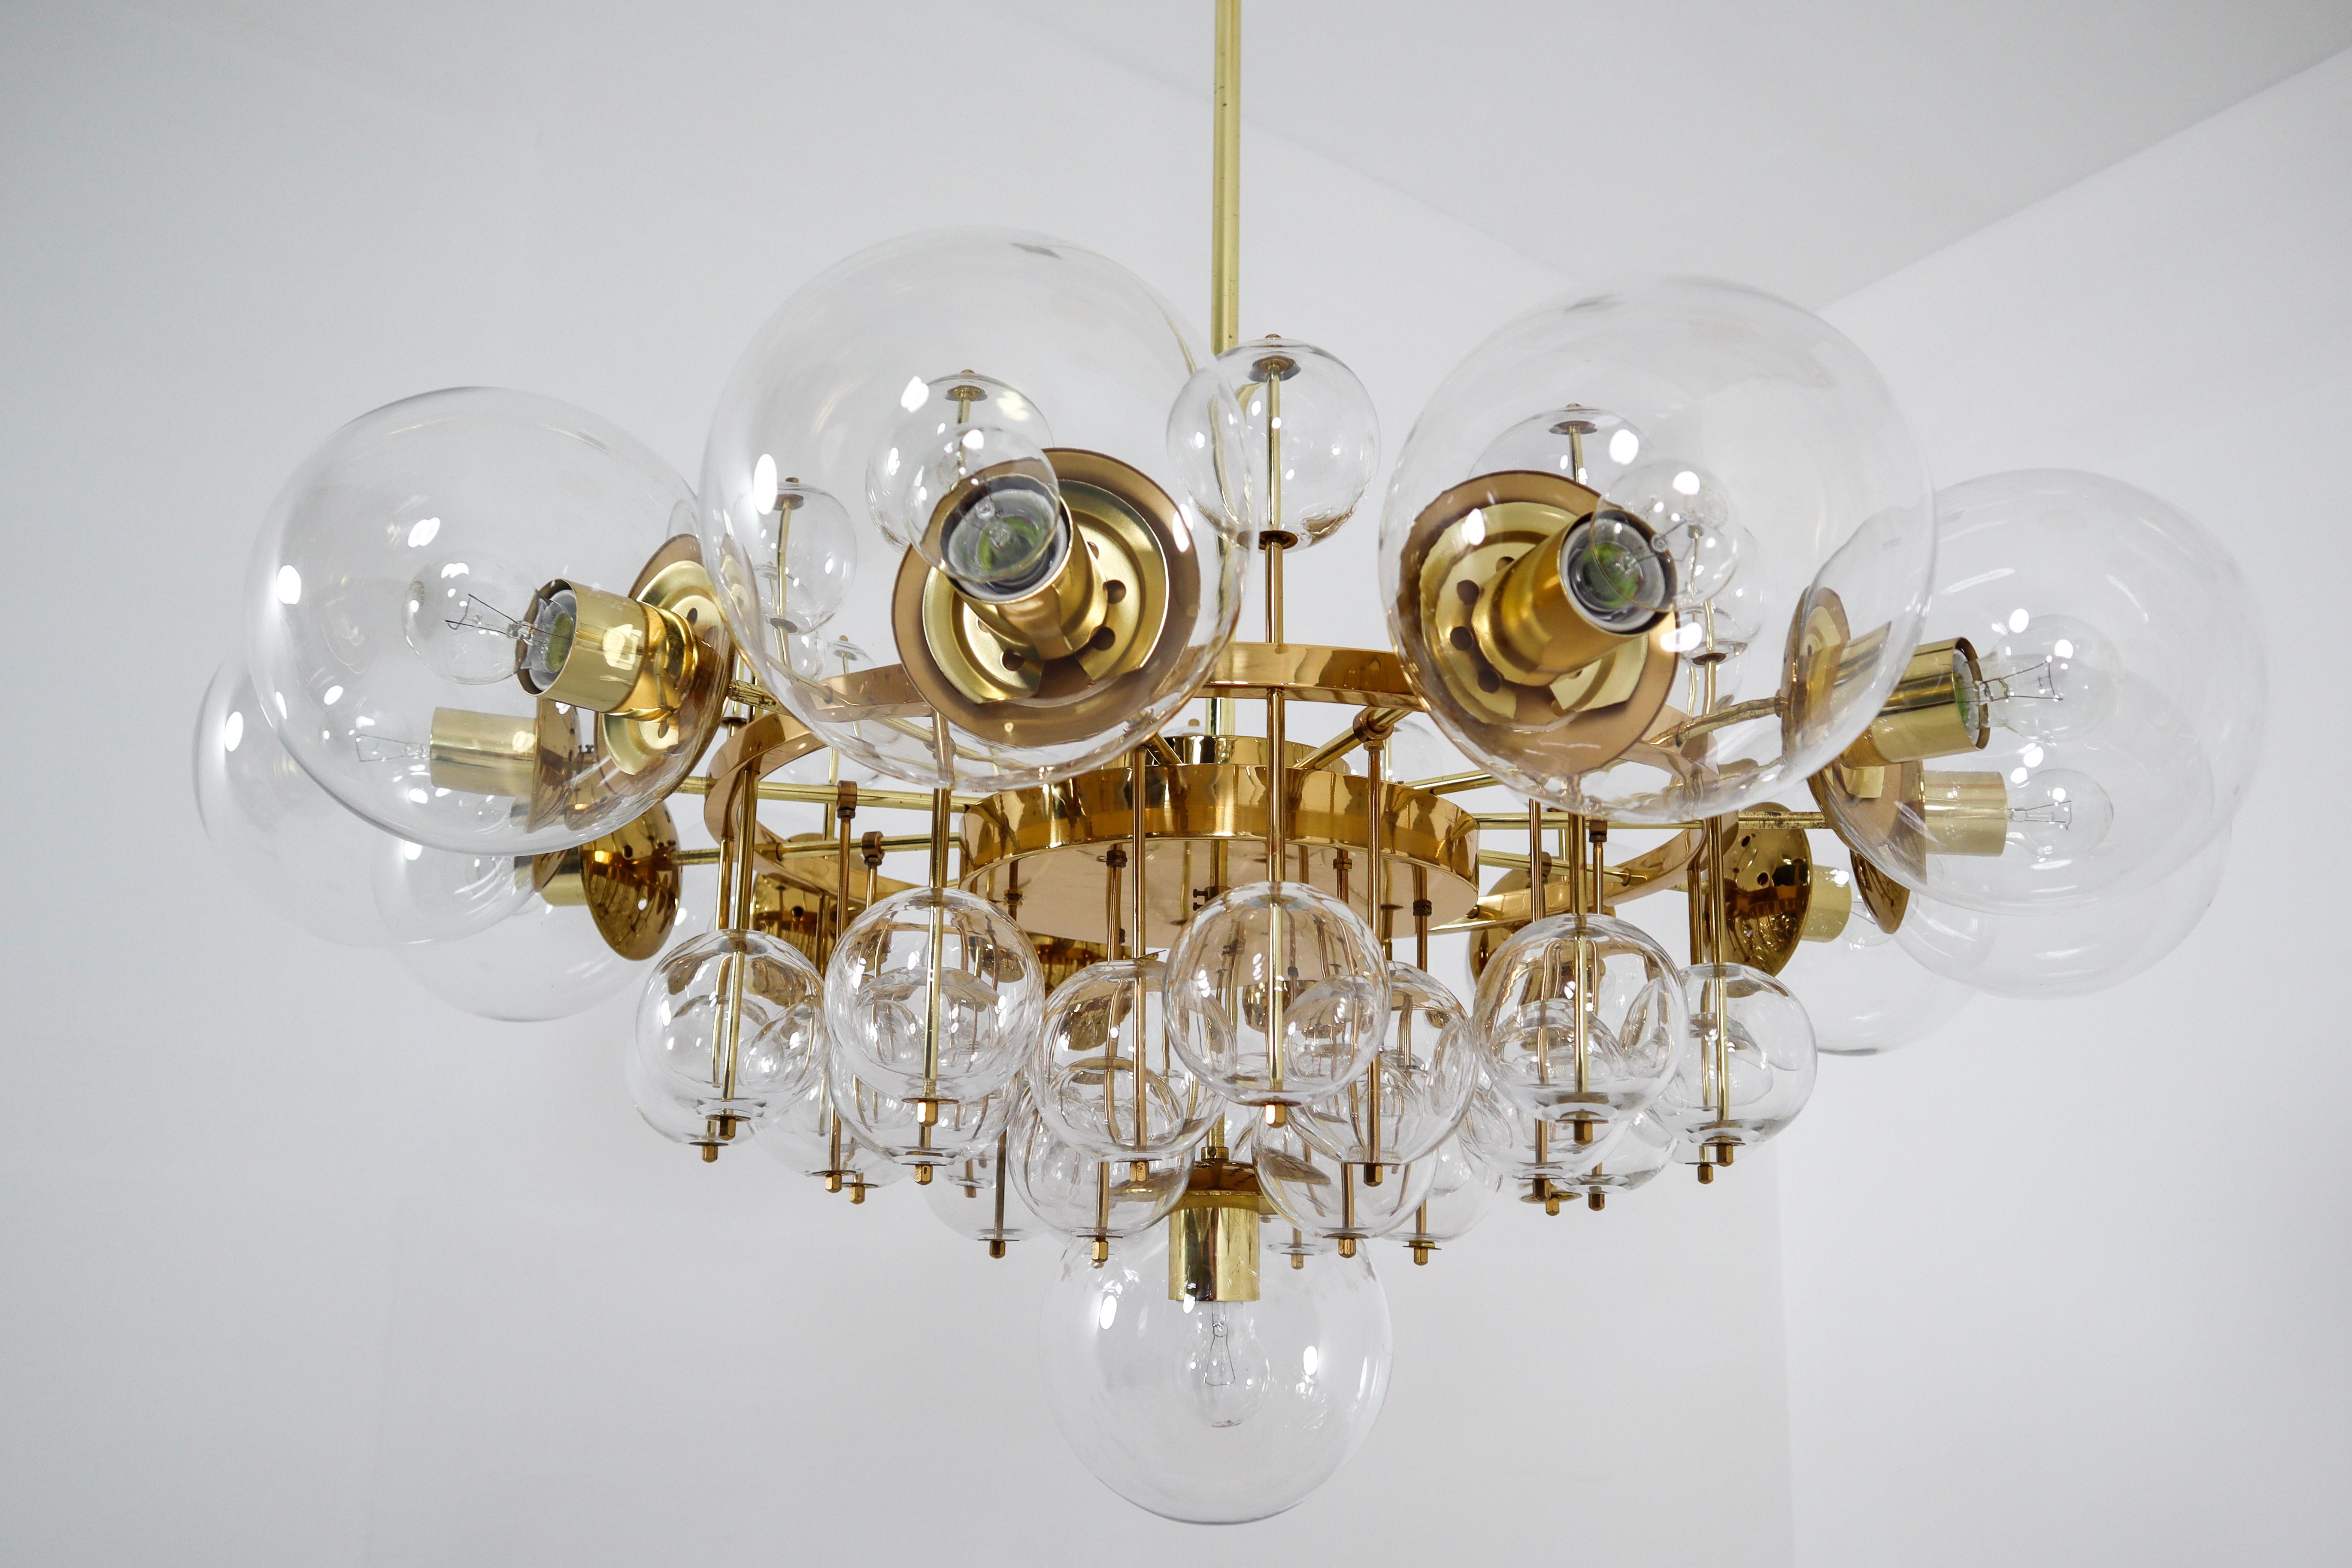 Austrian Midcentury Hotel Chandelier with Brass Fixture and Hand-Blowed Glass Globes